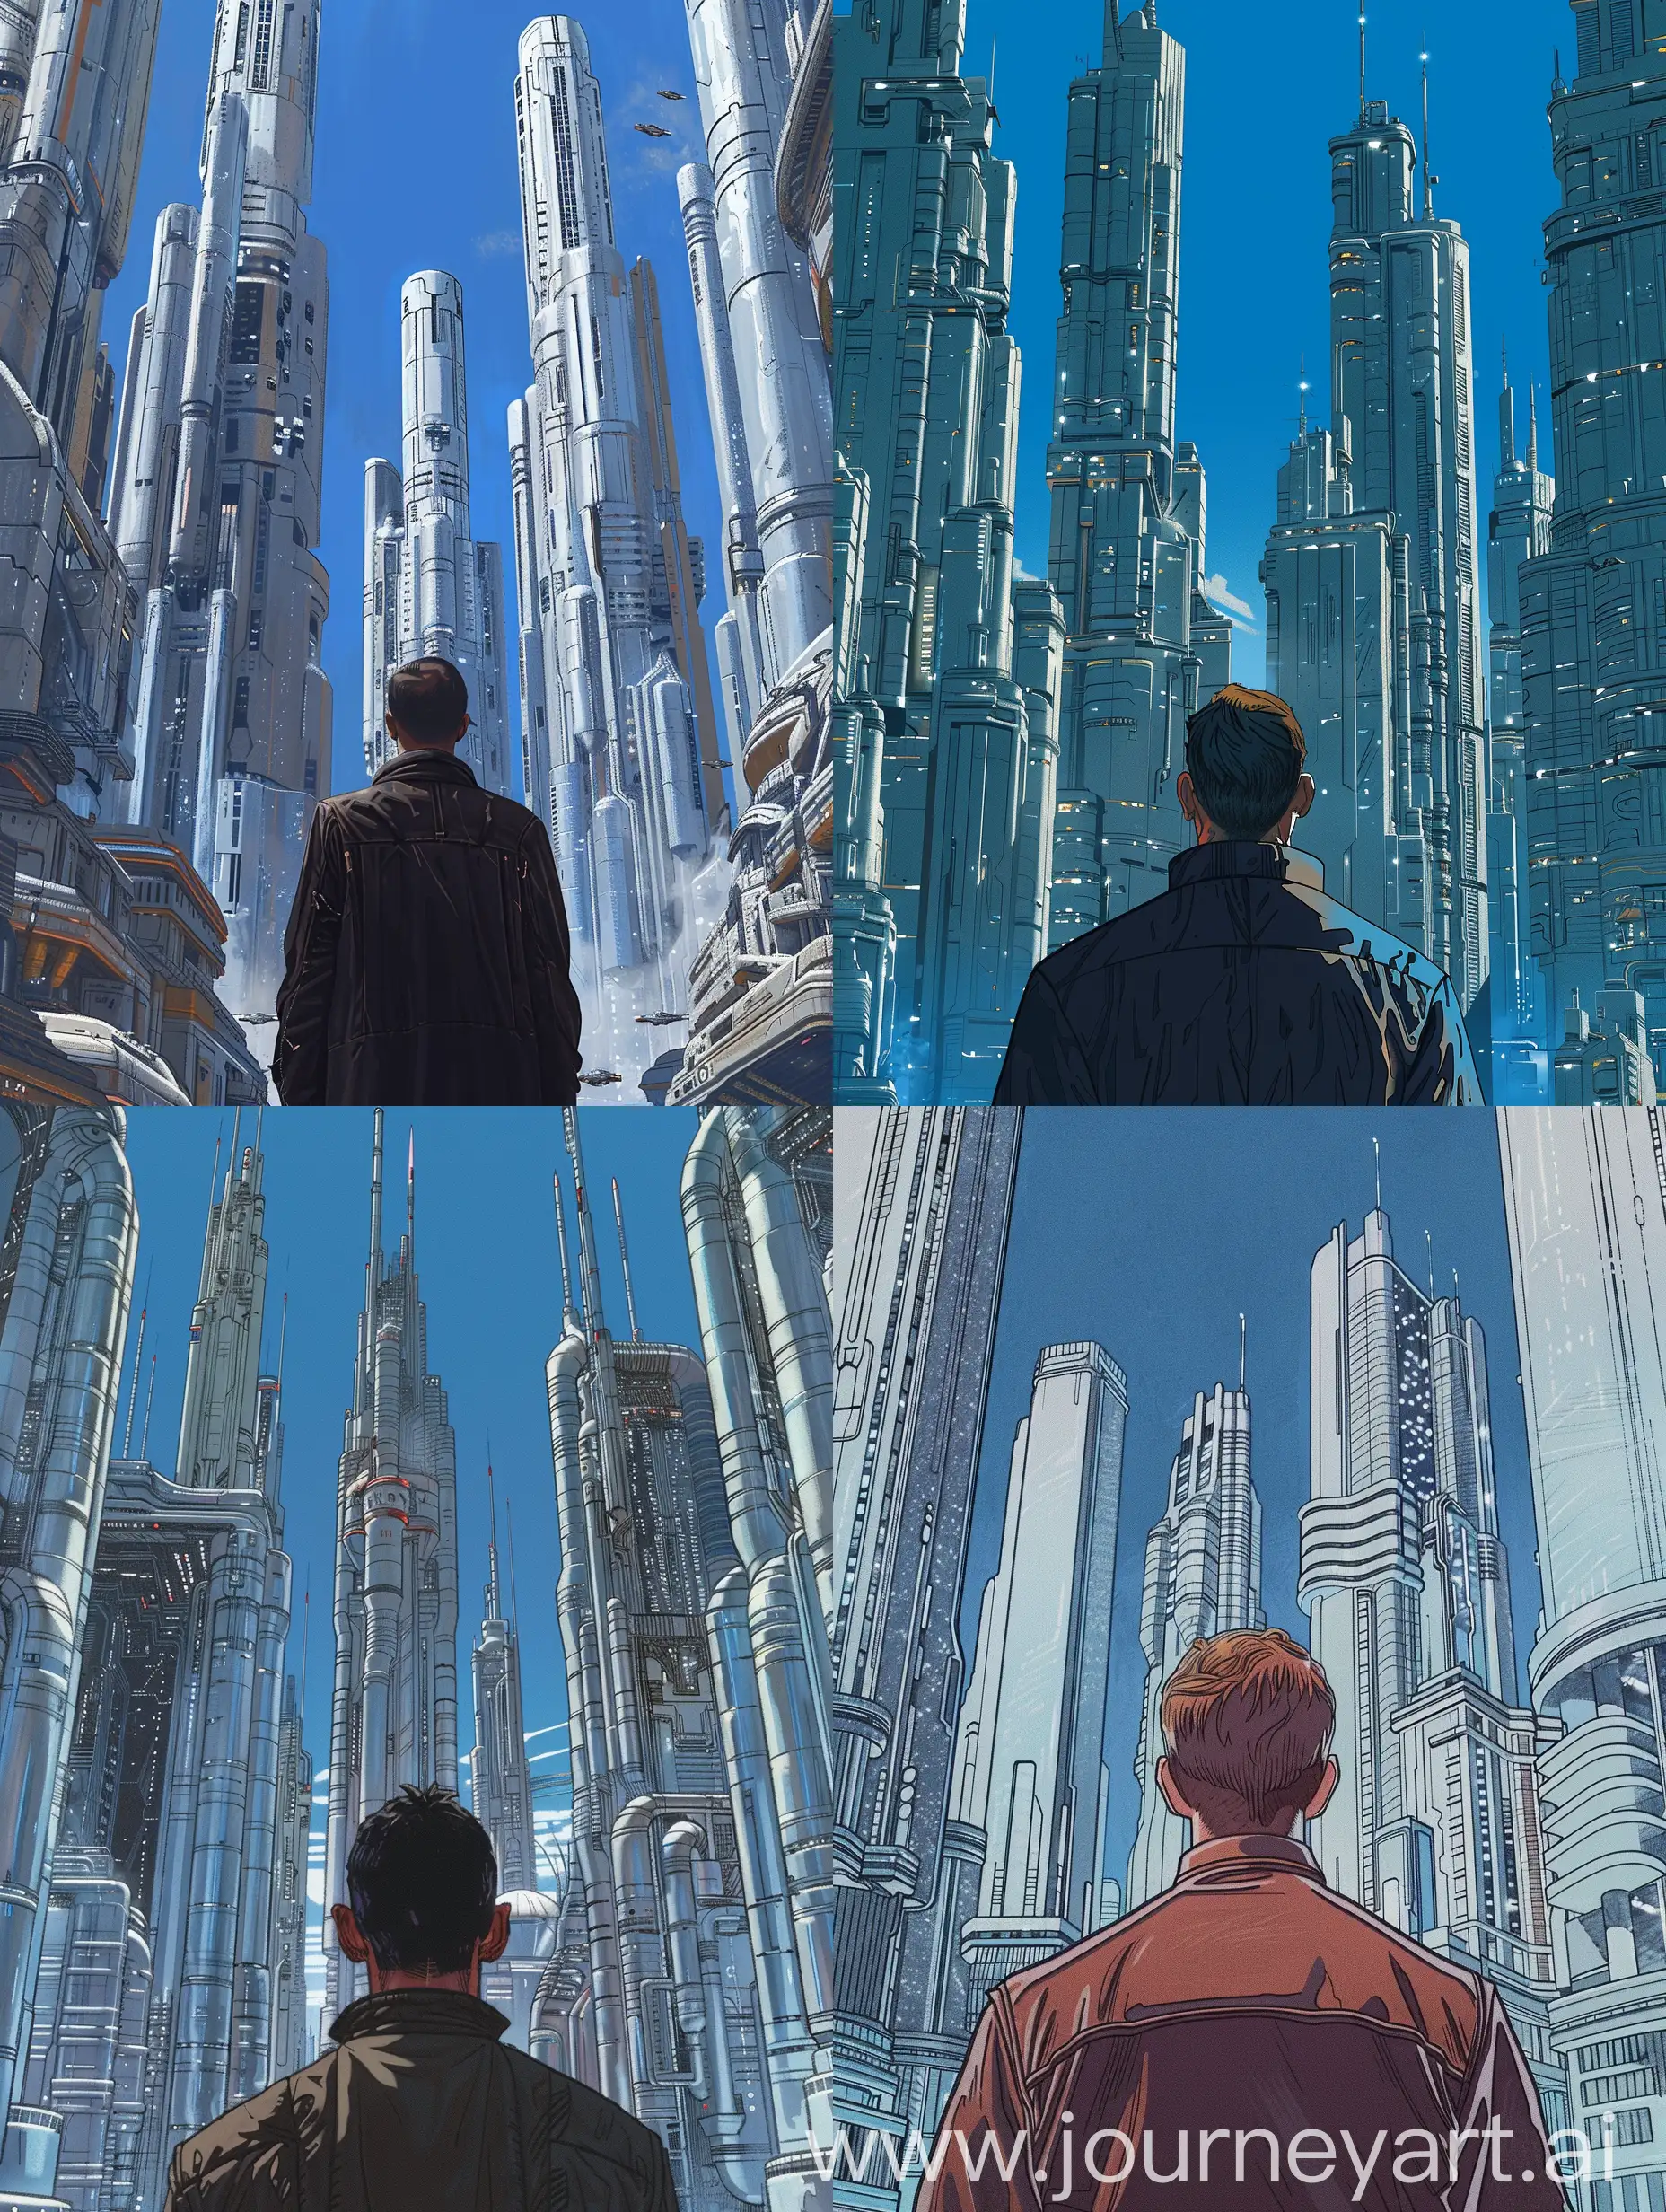 concept art of the back of man in the center looking  resolutely at looming shimmering silver skyscrapers in the futuristic cityscape. in retro science fiction art style. in color. blue sky.

